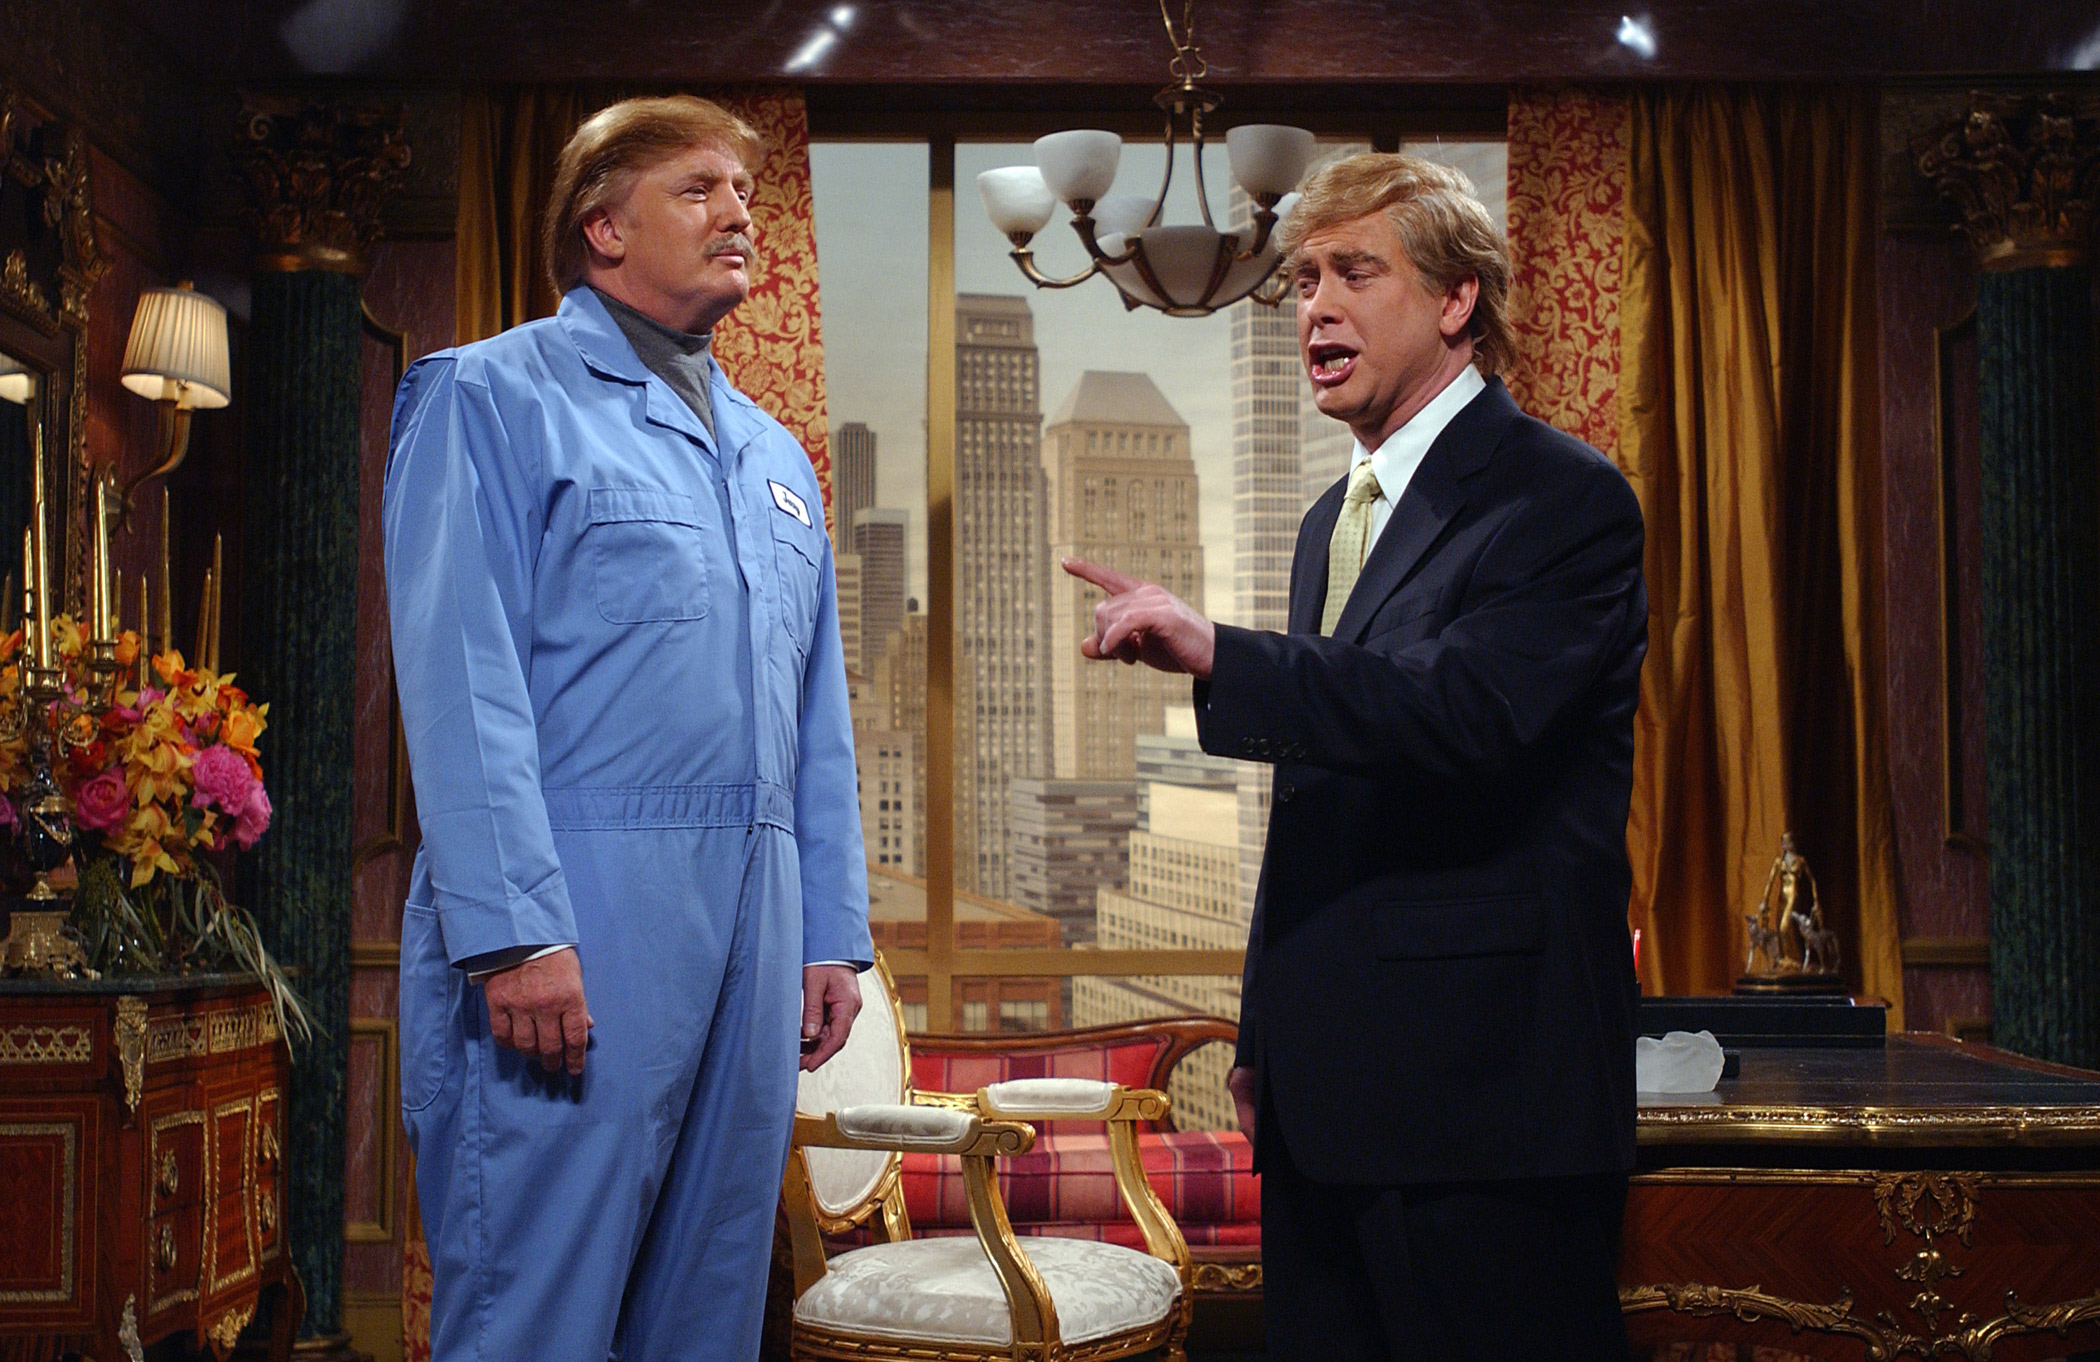 Darrell Hammond as Donald Trump, right, appears with Donald Trump as Jerry the Janitor in the SNL sketch 'The Prince and the Pauper' on April 3, 2004.